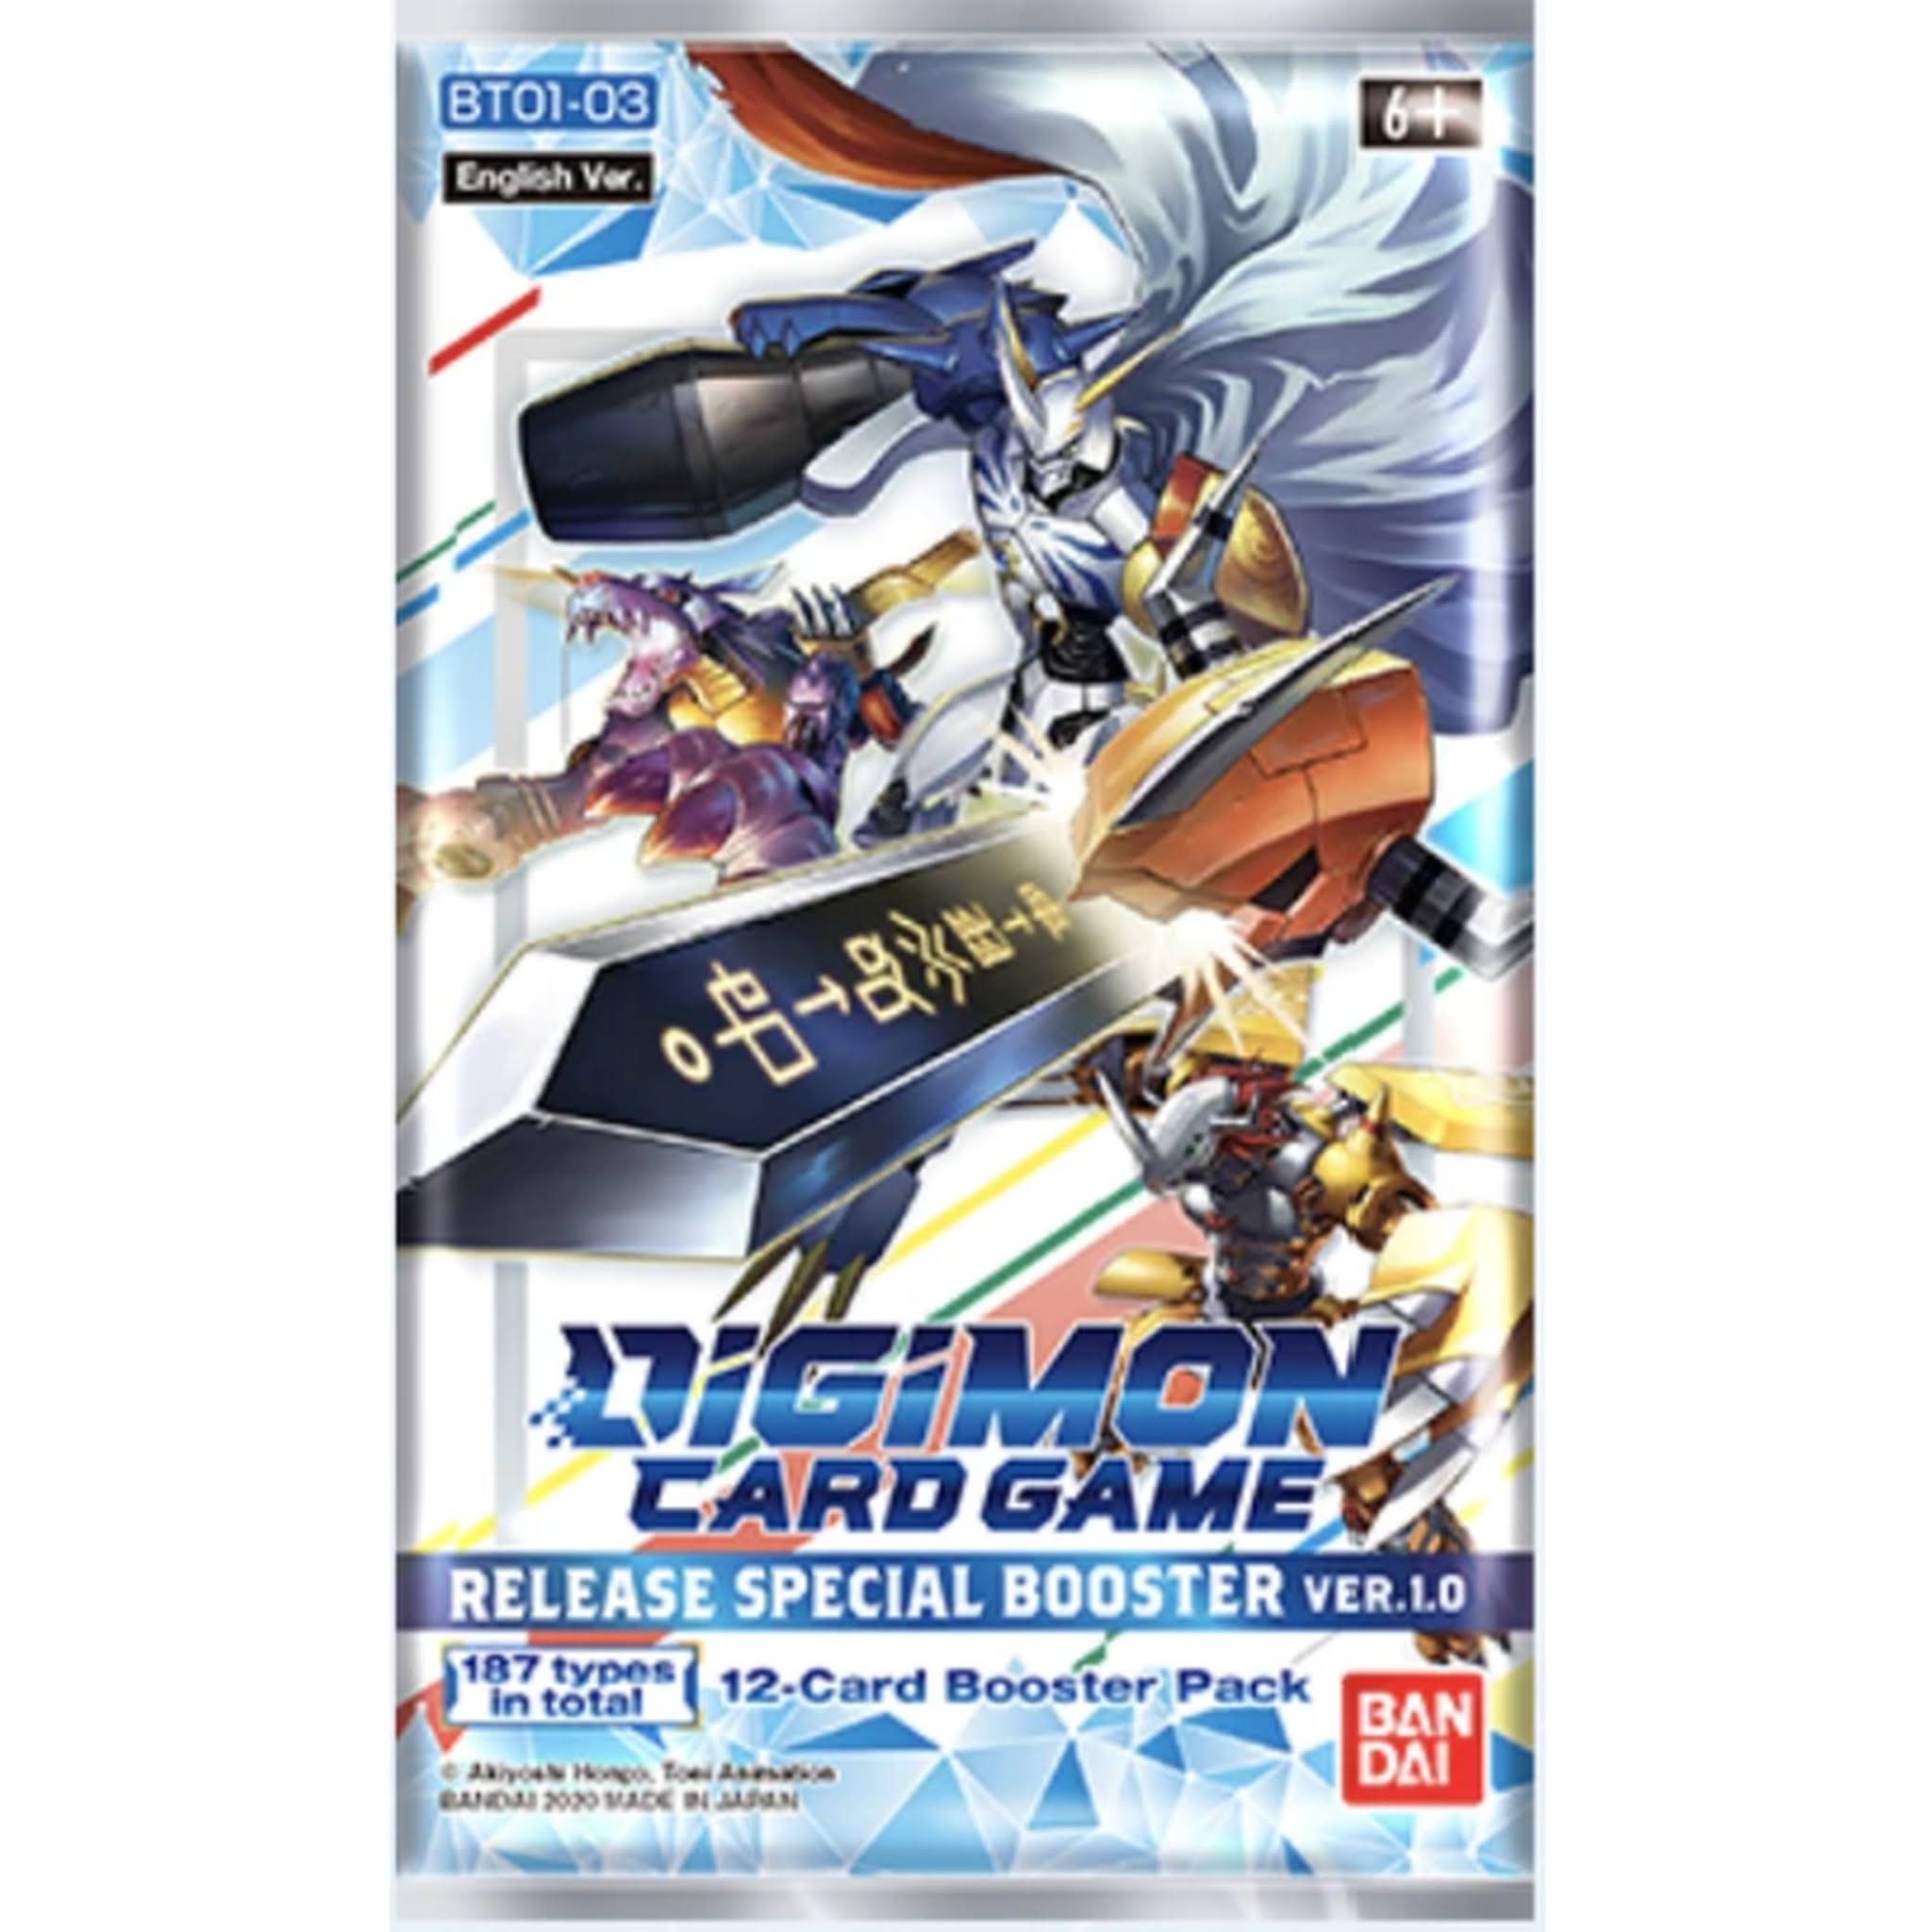 Digimon Card Game Series 01 Special Booster Pack